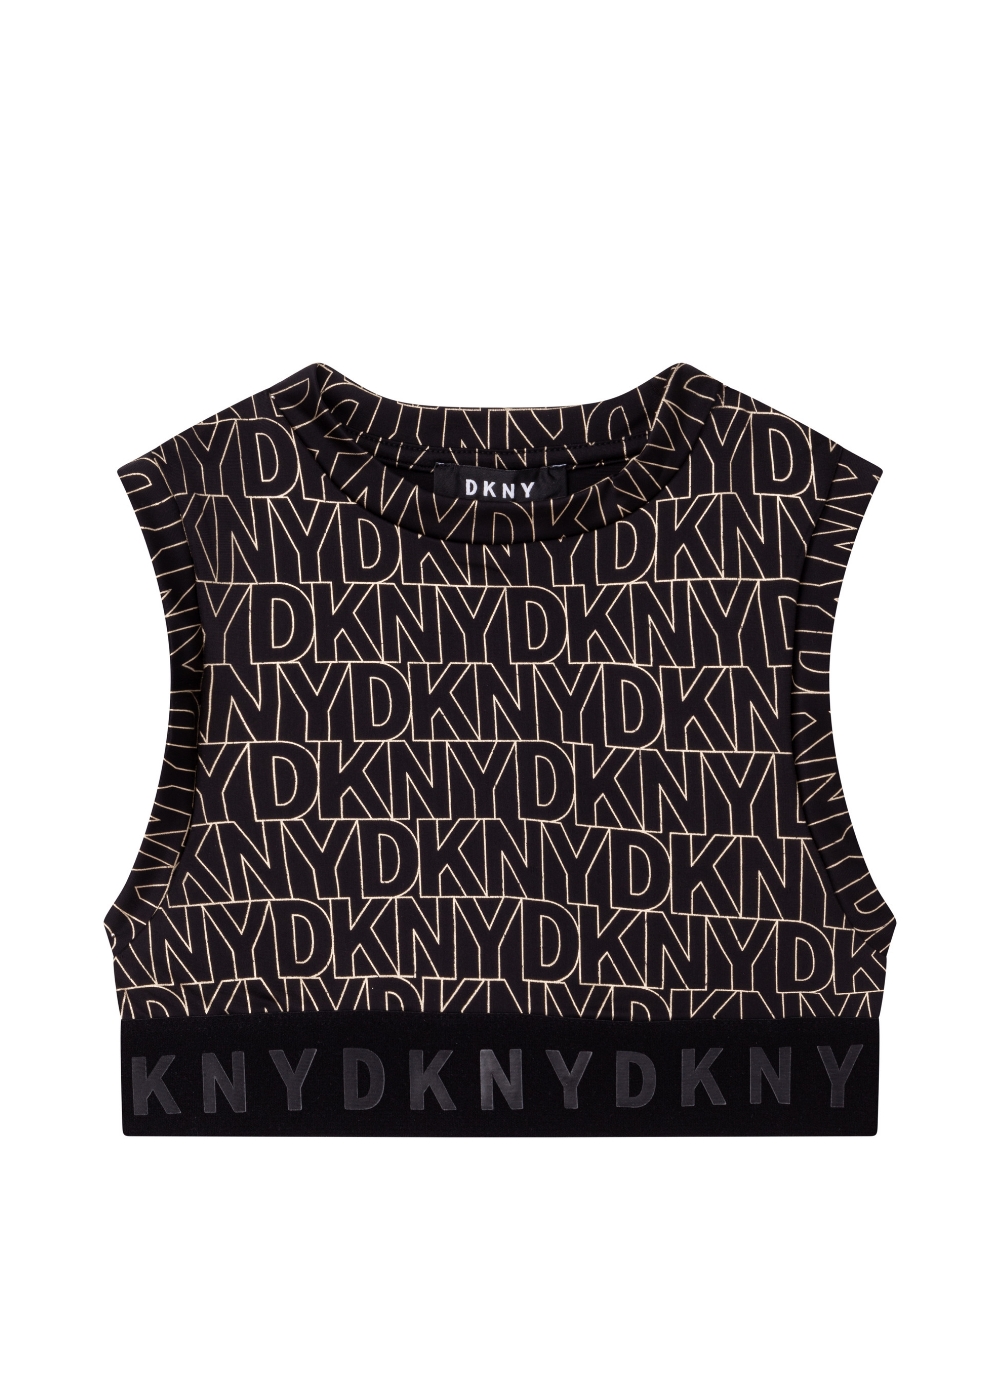 Featured image for “Dkny Top Cropped”